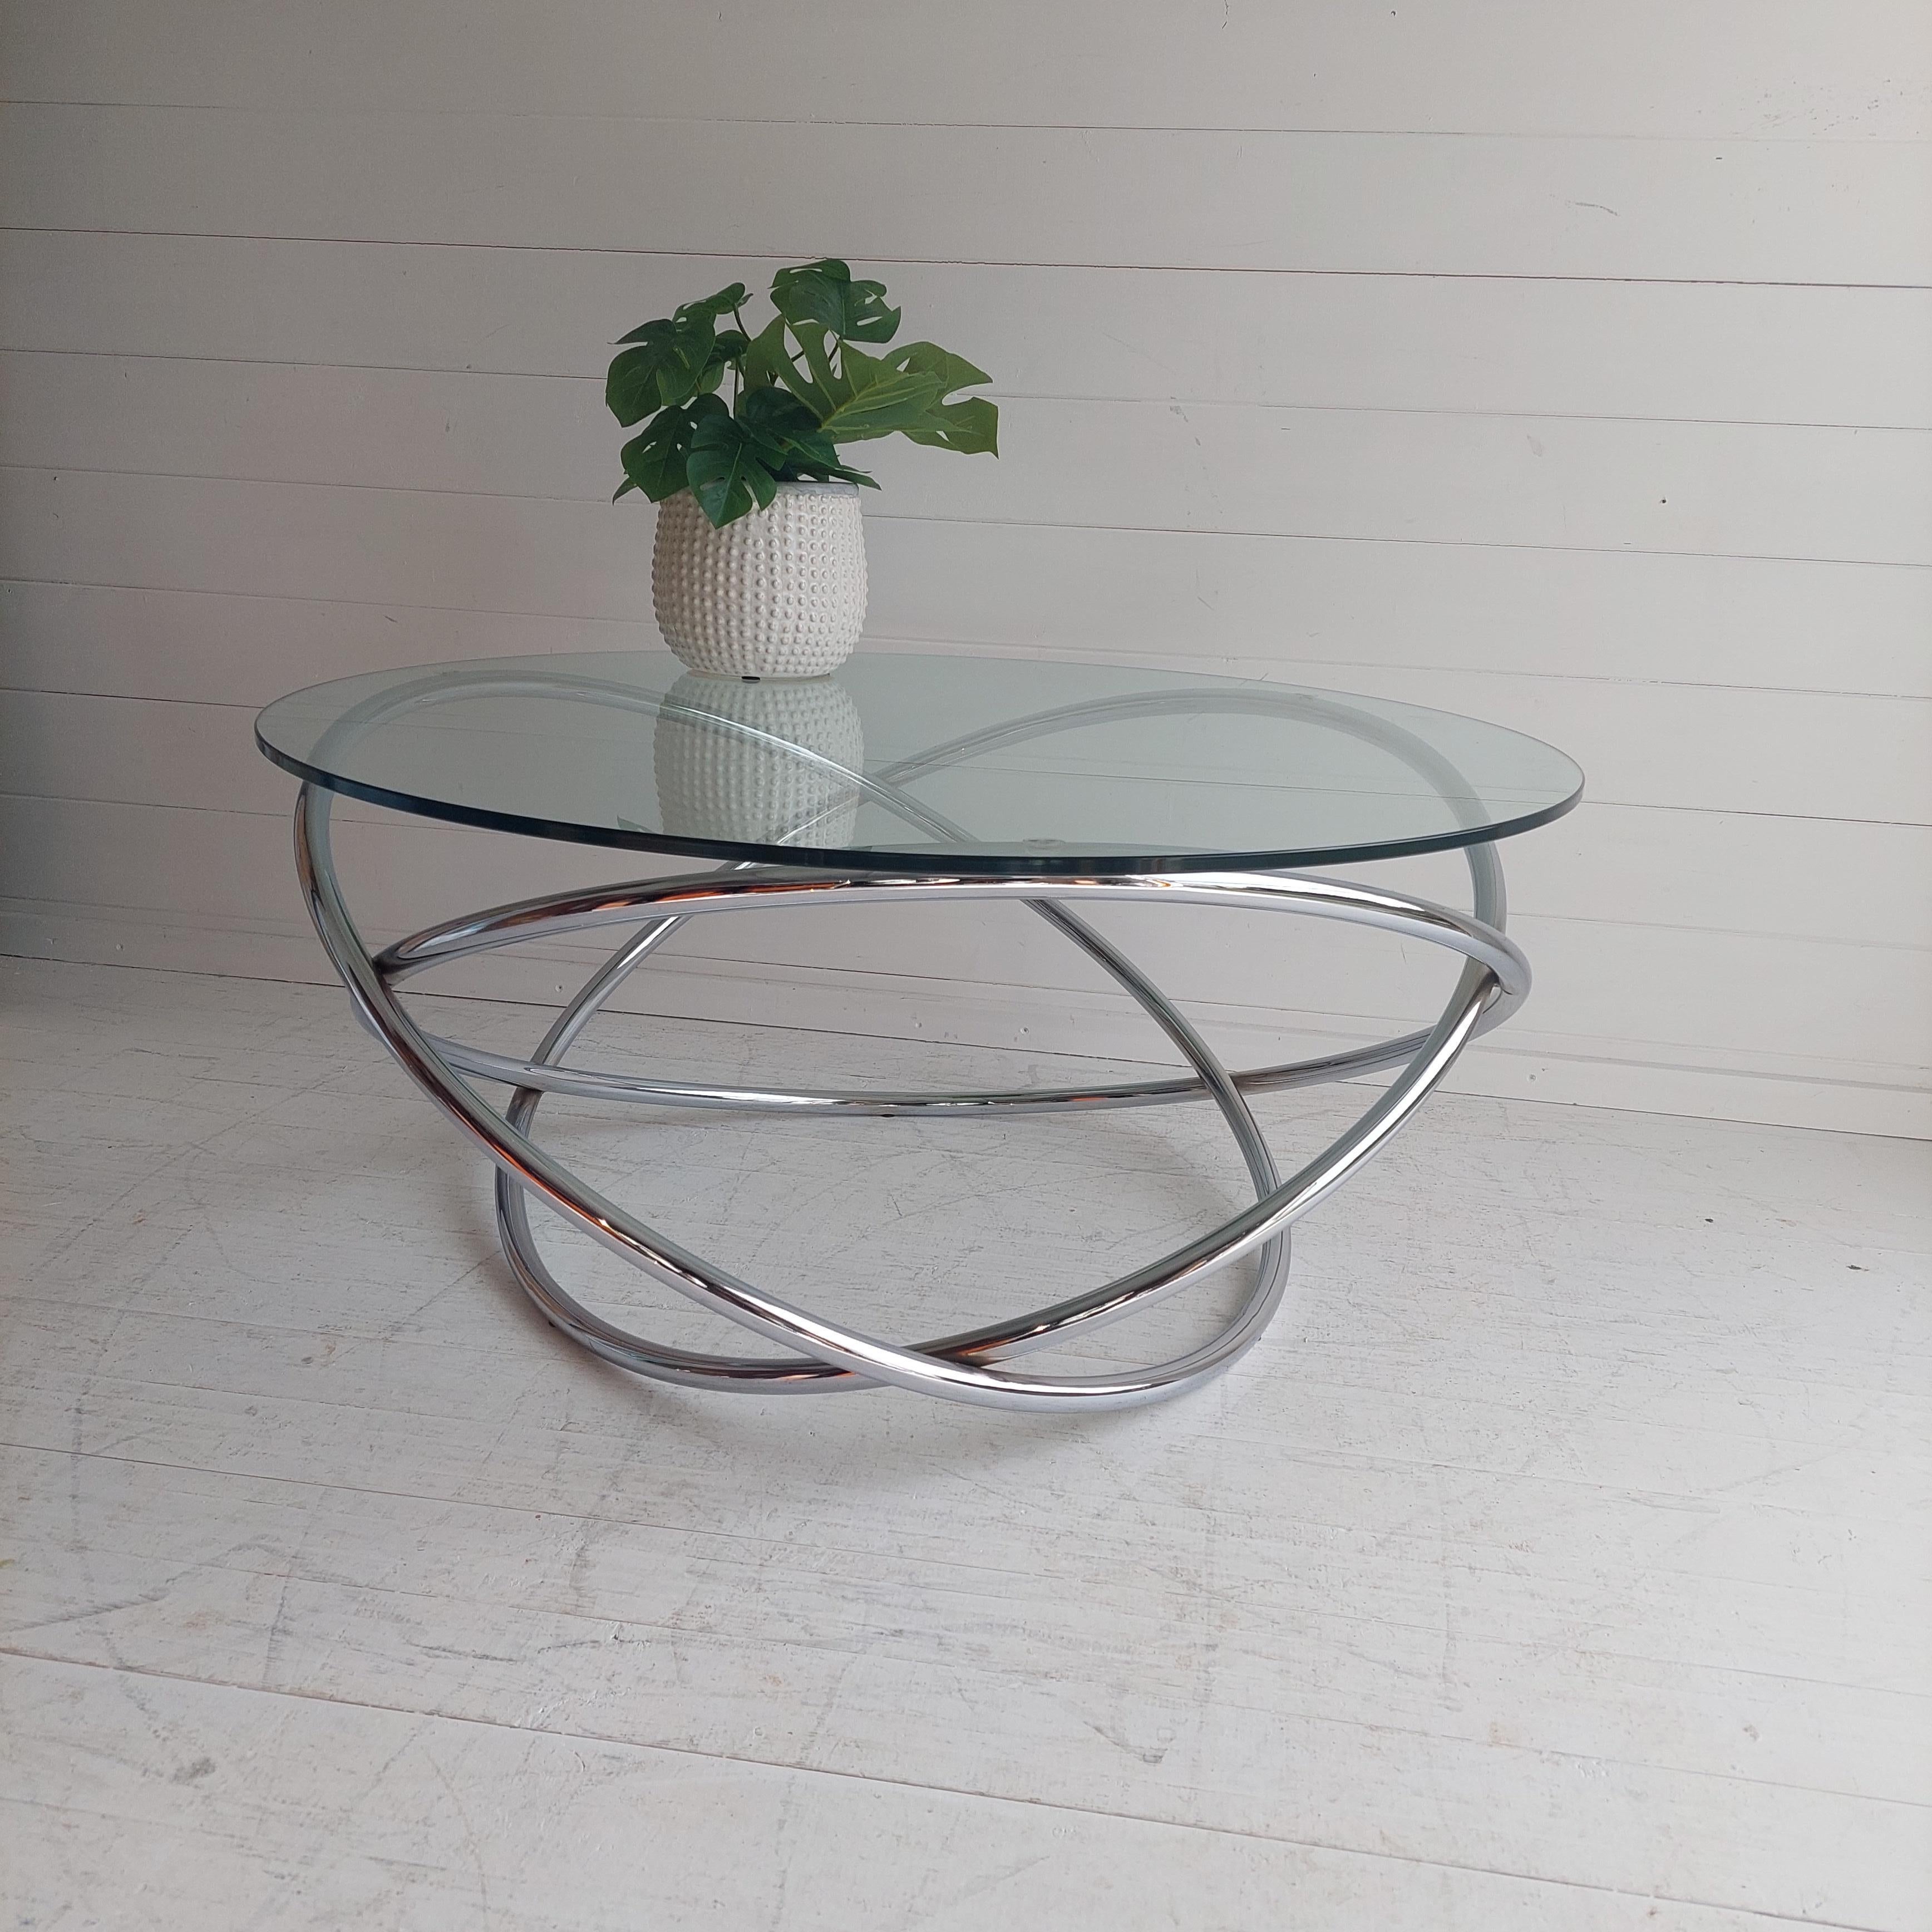 A Stunning round glass and tubular metal coffee table with a spiral pedestal base in a space age style.
Mid century italian minimalist swirl coffee table. 
Great top glass and chrome base minimalist swirl coffee table probably made by Miniforms,